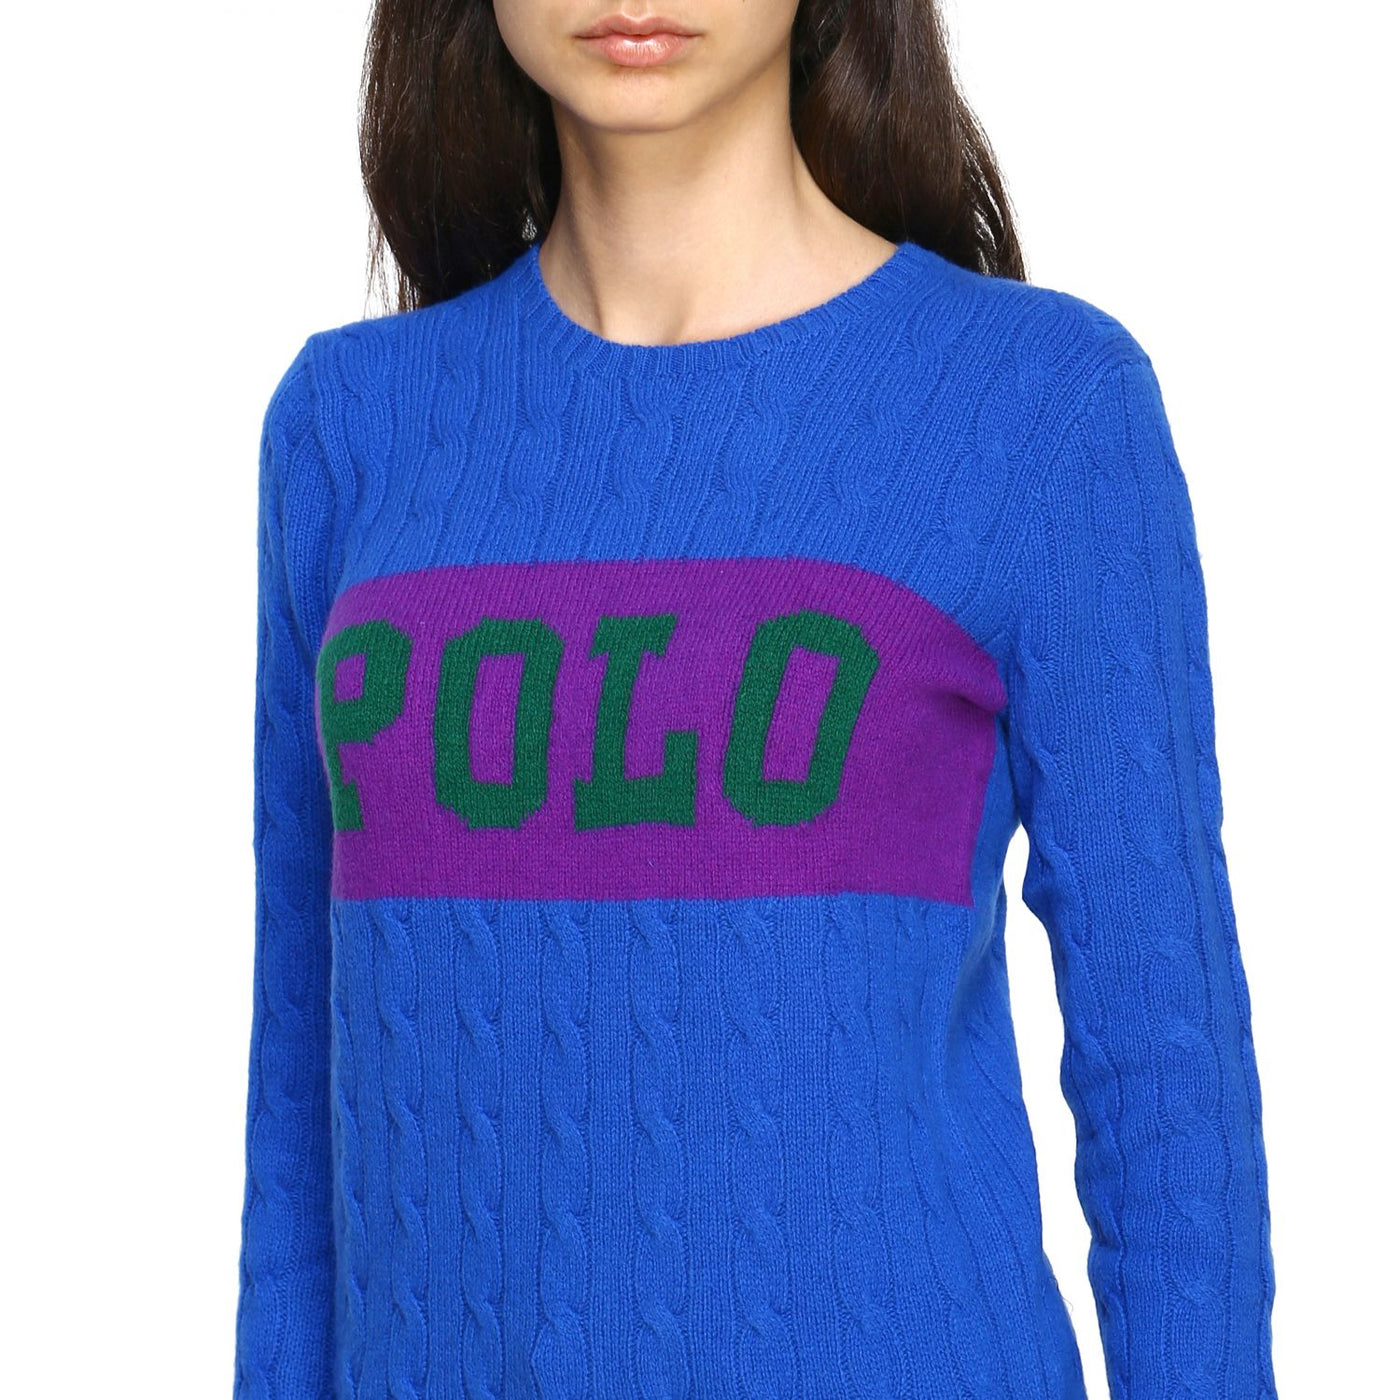 Women's cable knit sweater